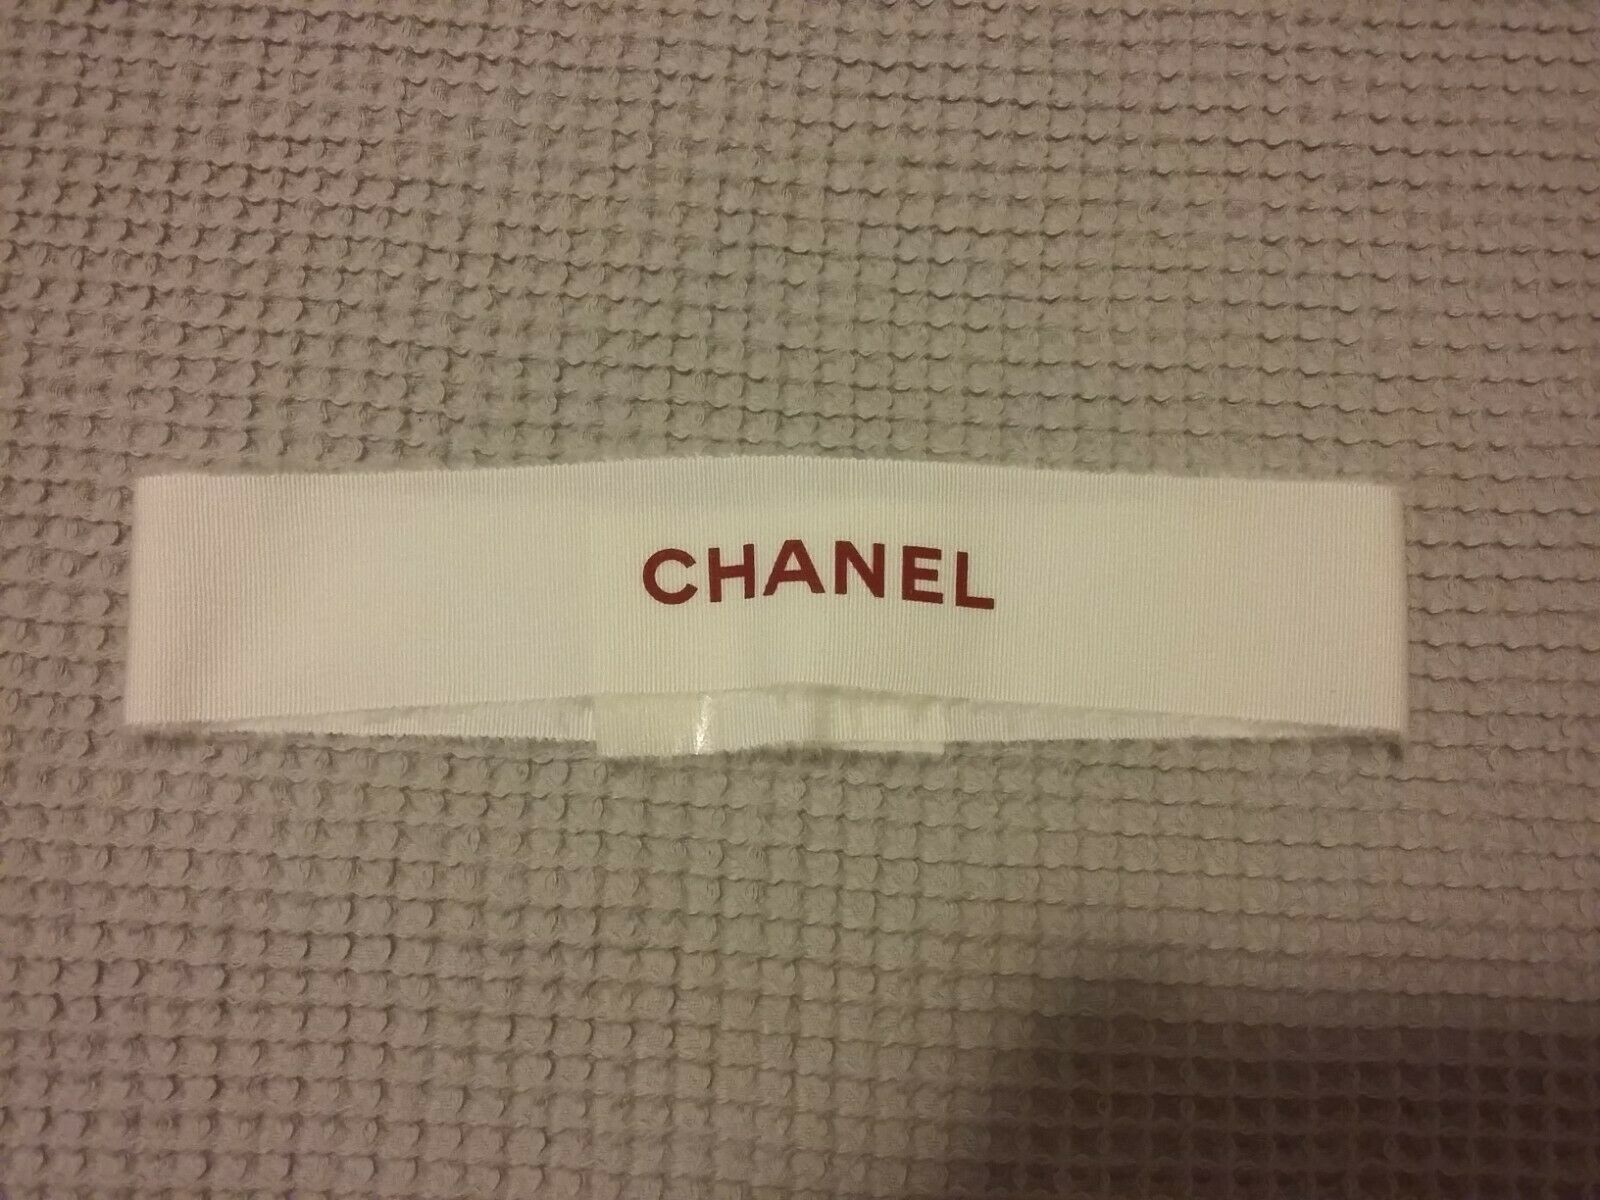 NEW CHANEL white dark red lettering Holiday RIBBON 27 length x 2.1 inches wide  - $19.79